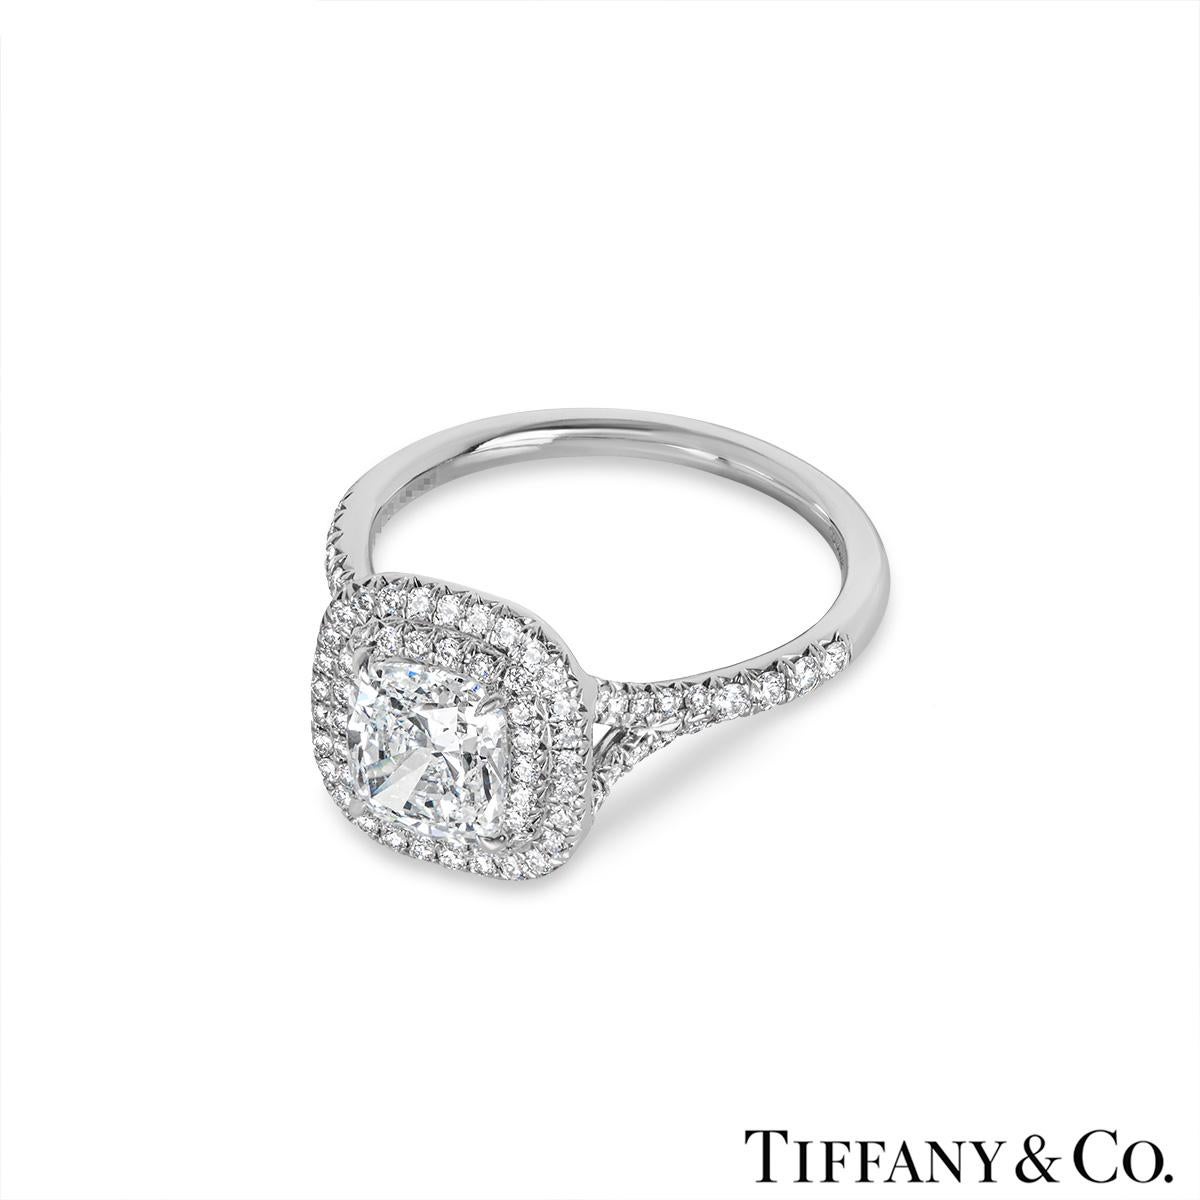 Tiffany & Co. Platinum Cushion Cut Diamond Soleste Ring 1.55ct G/VS1 In Excellent Condition For Sale In London, GB